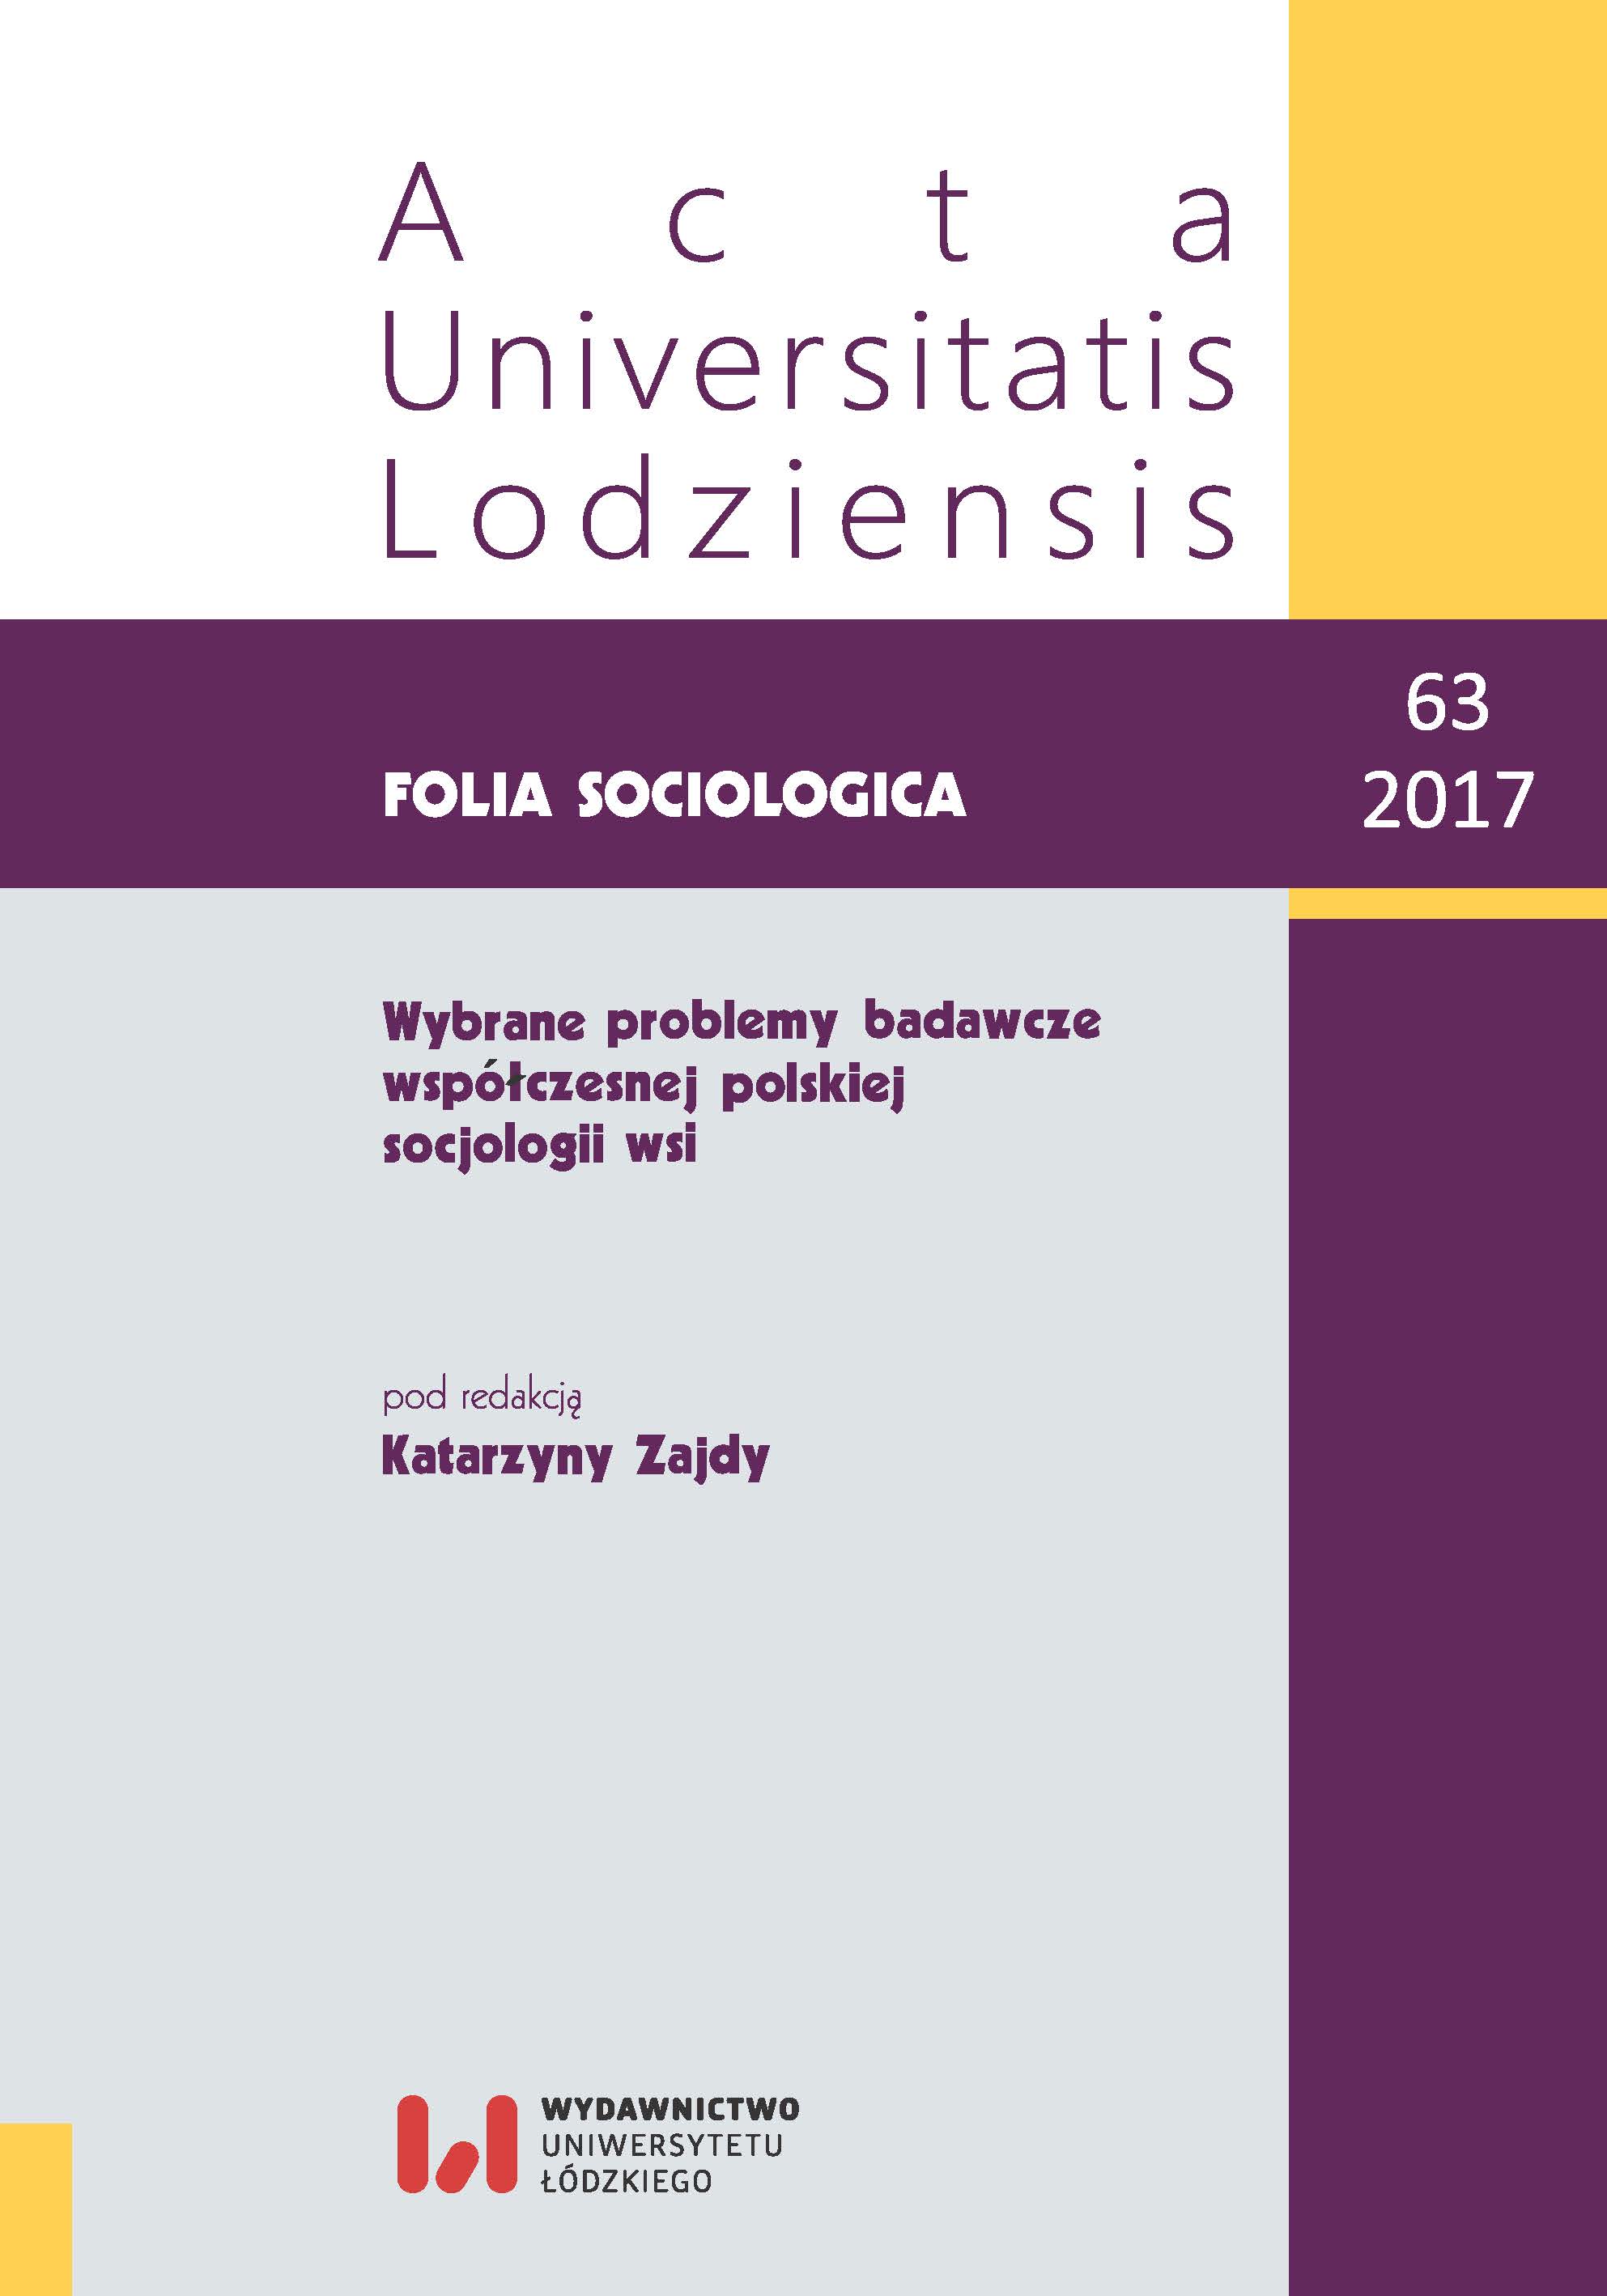 Specificity of NGO Relations – The Local Government on Rural Areas of Masovian Voivodeship (Considering own Research) Cover Image